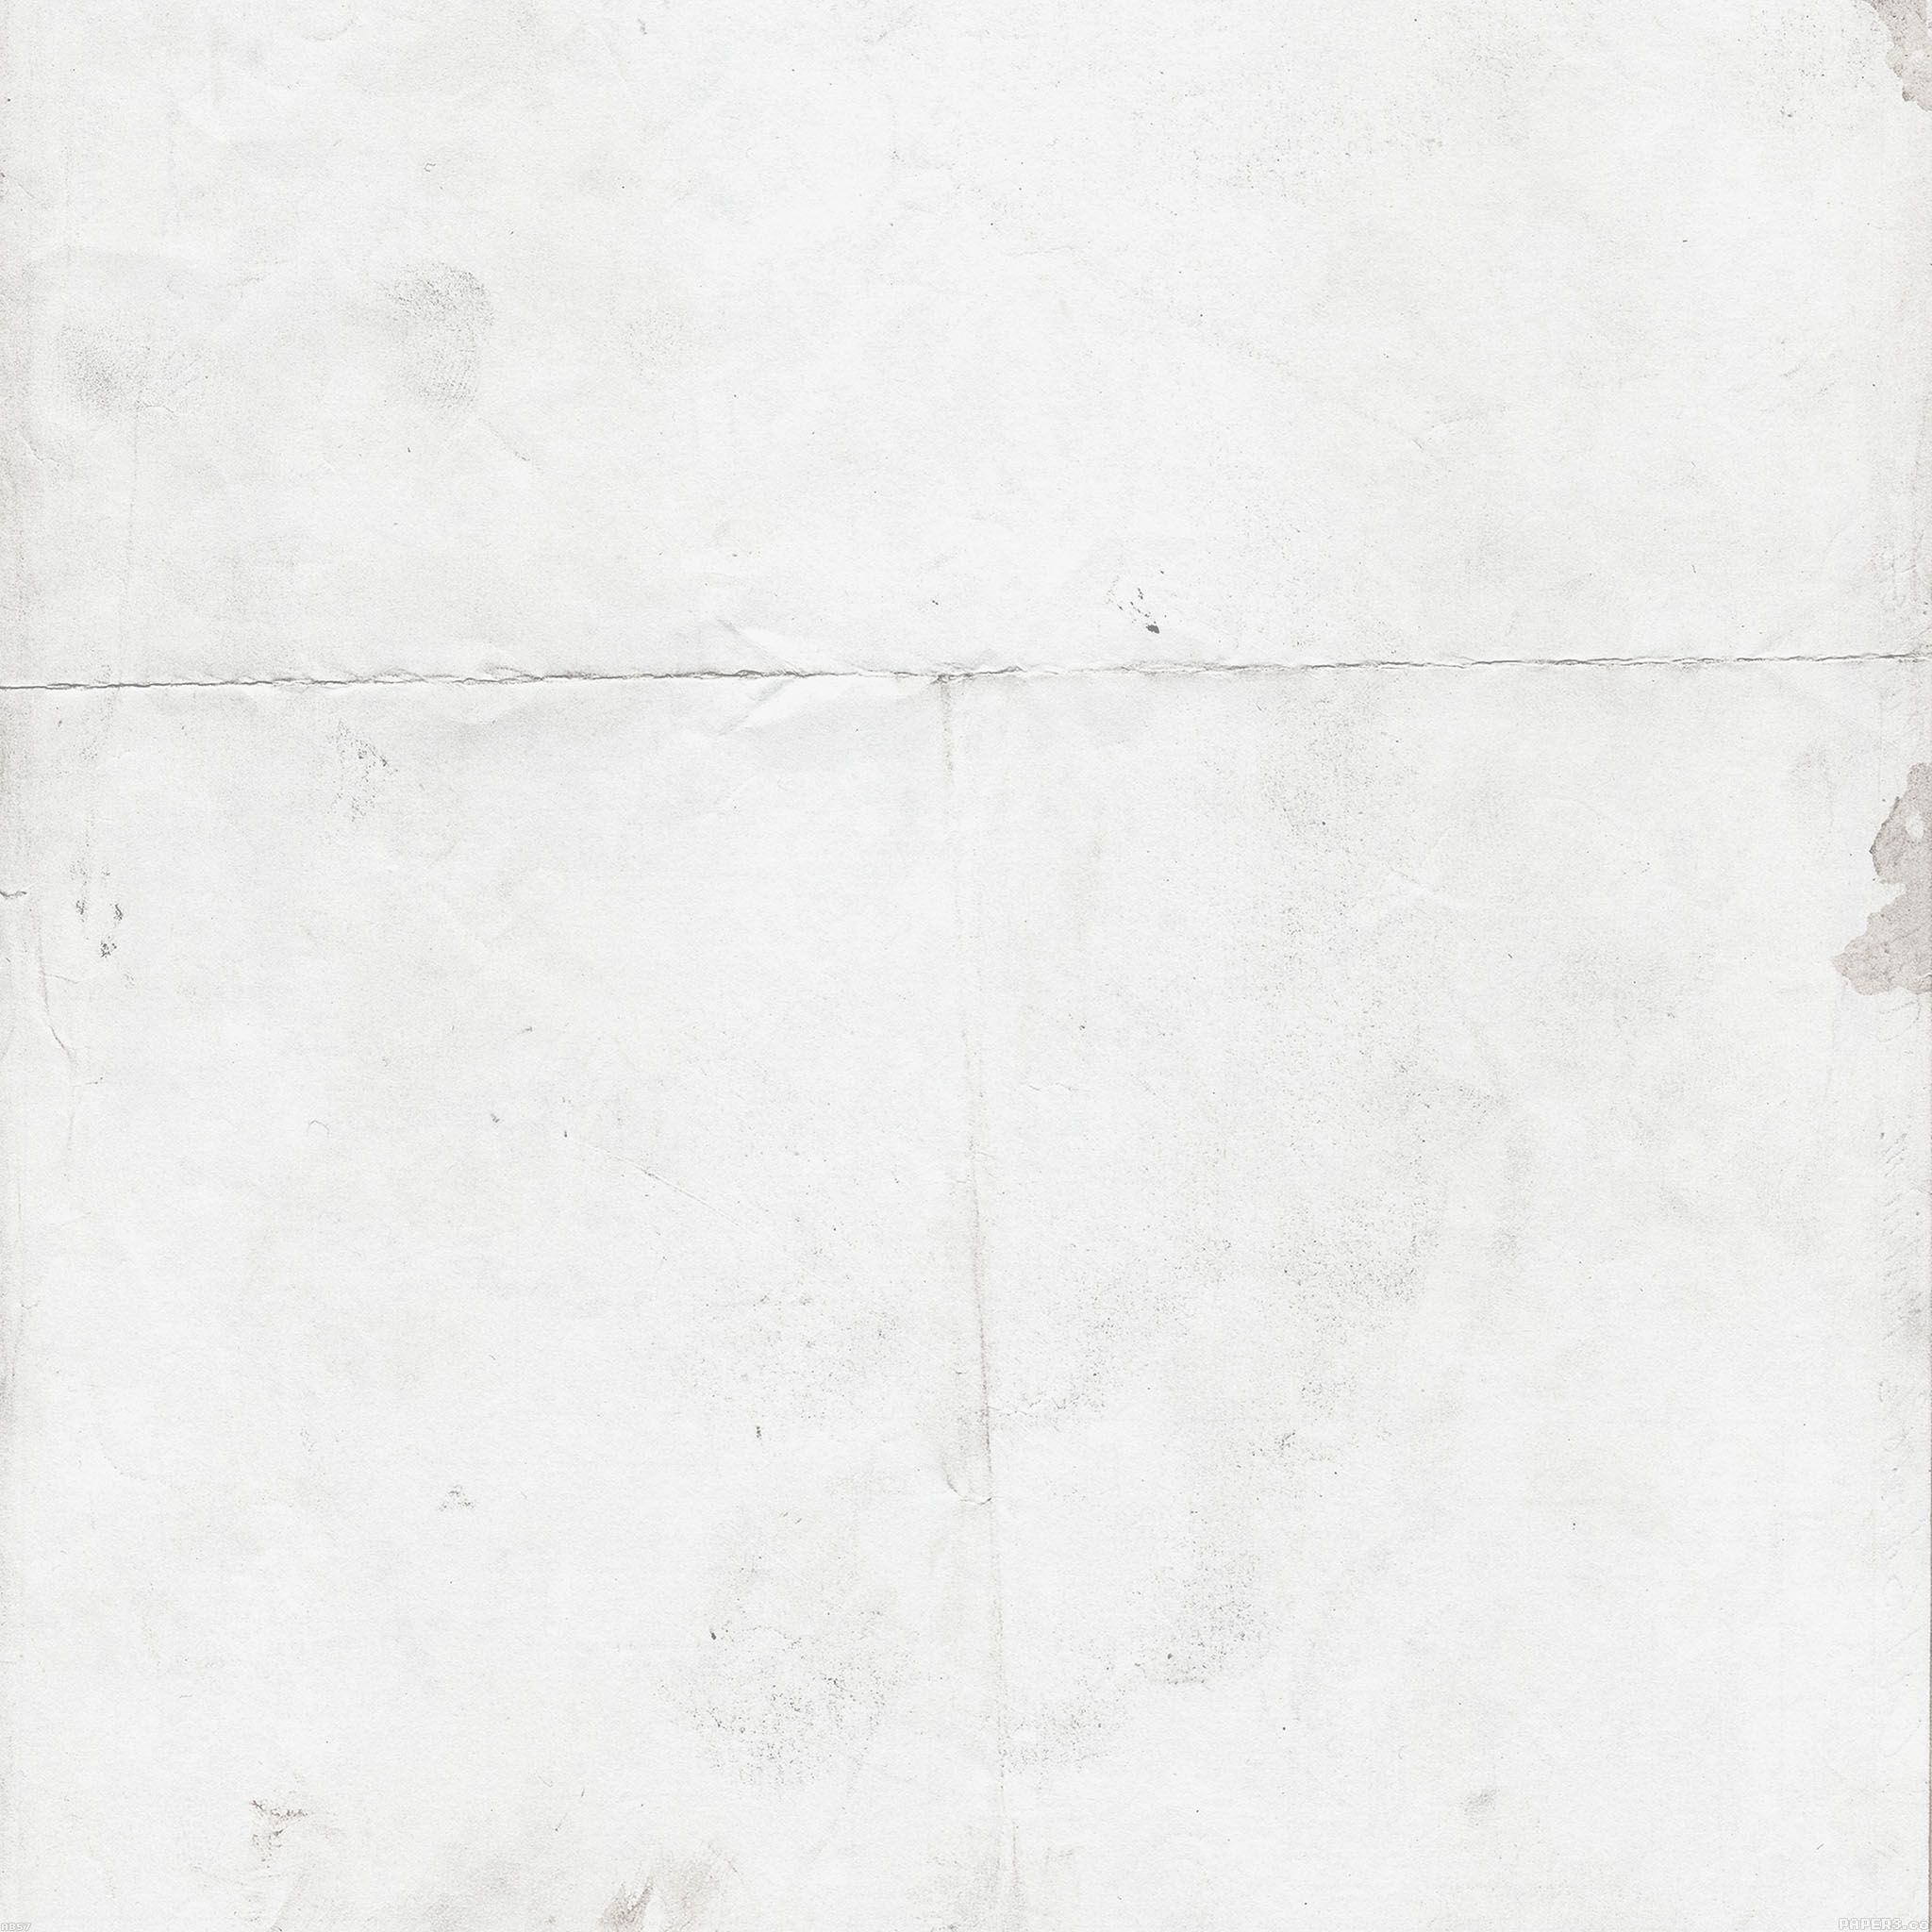 ab57-wallpaper-grunge-paper-texture-white - Papeles.co